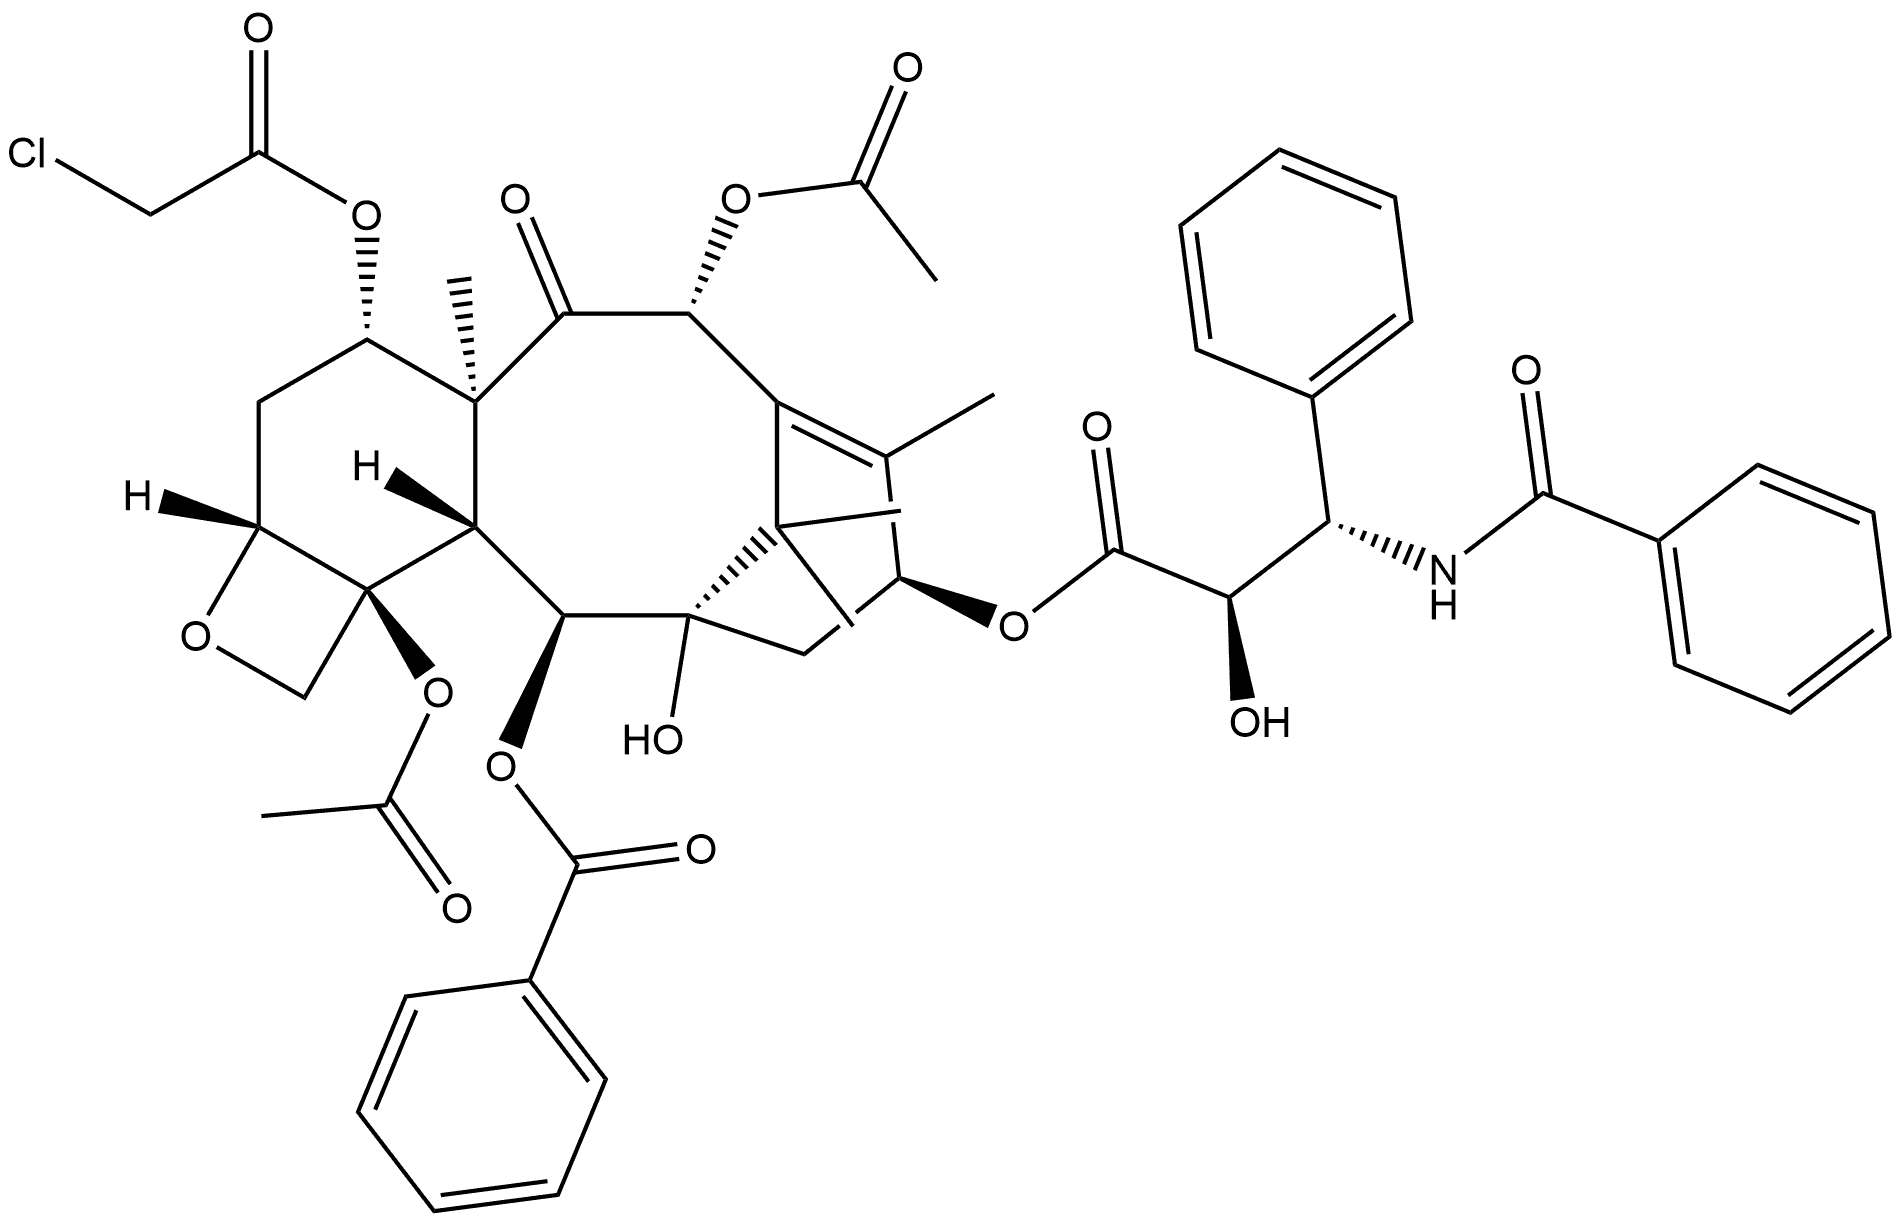 Benzenepropanoic acid, β-(benzoylamino)-α-hydroxy-, (2aR,4S,4aS,6R,9S,11S,12S,12aR,12bS)-6,12b-bis(acetyloxy)-12-(benzoyloxy)-4-[(chloroacetyl)oxy]-2a,3,4,4a,5,6,9,10,11,12,12a,12b-dodecahydro-11-hydroxy-4a,8,13,13-tetramethyl-5-oxo-7,11-methano-1H-cyclodeca[3,4]benz[1,2-b]oxet-9-yl ester, (αR,βS)-